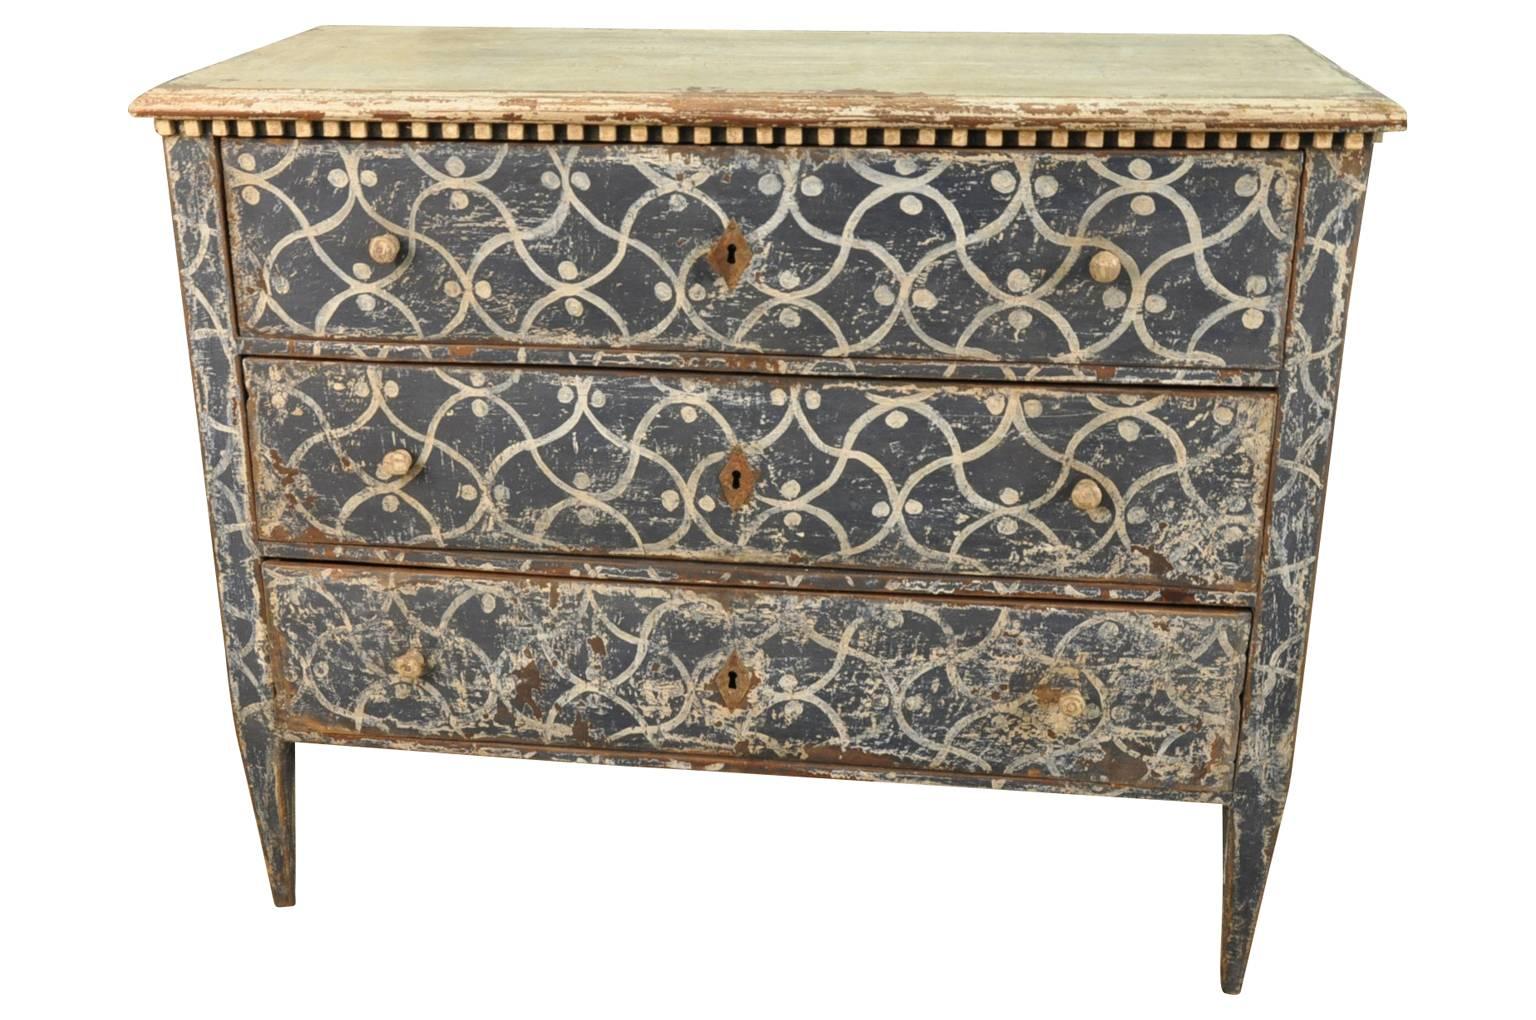 A sensational late 19th century painted commode from Spain. Great construction with dentilated detail and tapered legs. The painted finish is wonderful with lovely motif and texture. Great as a bedside cabinet or converted into a bathroom or powder